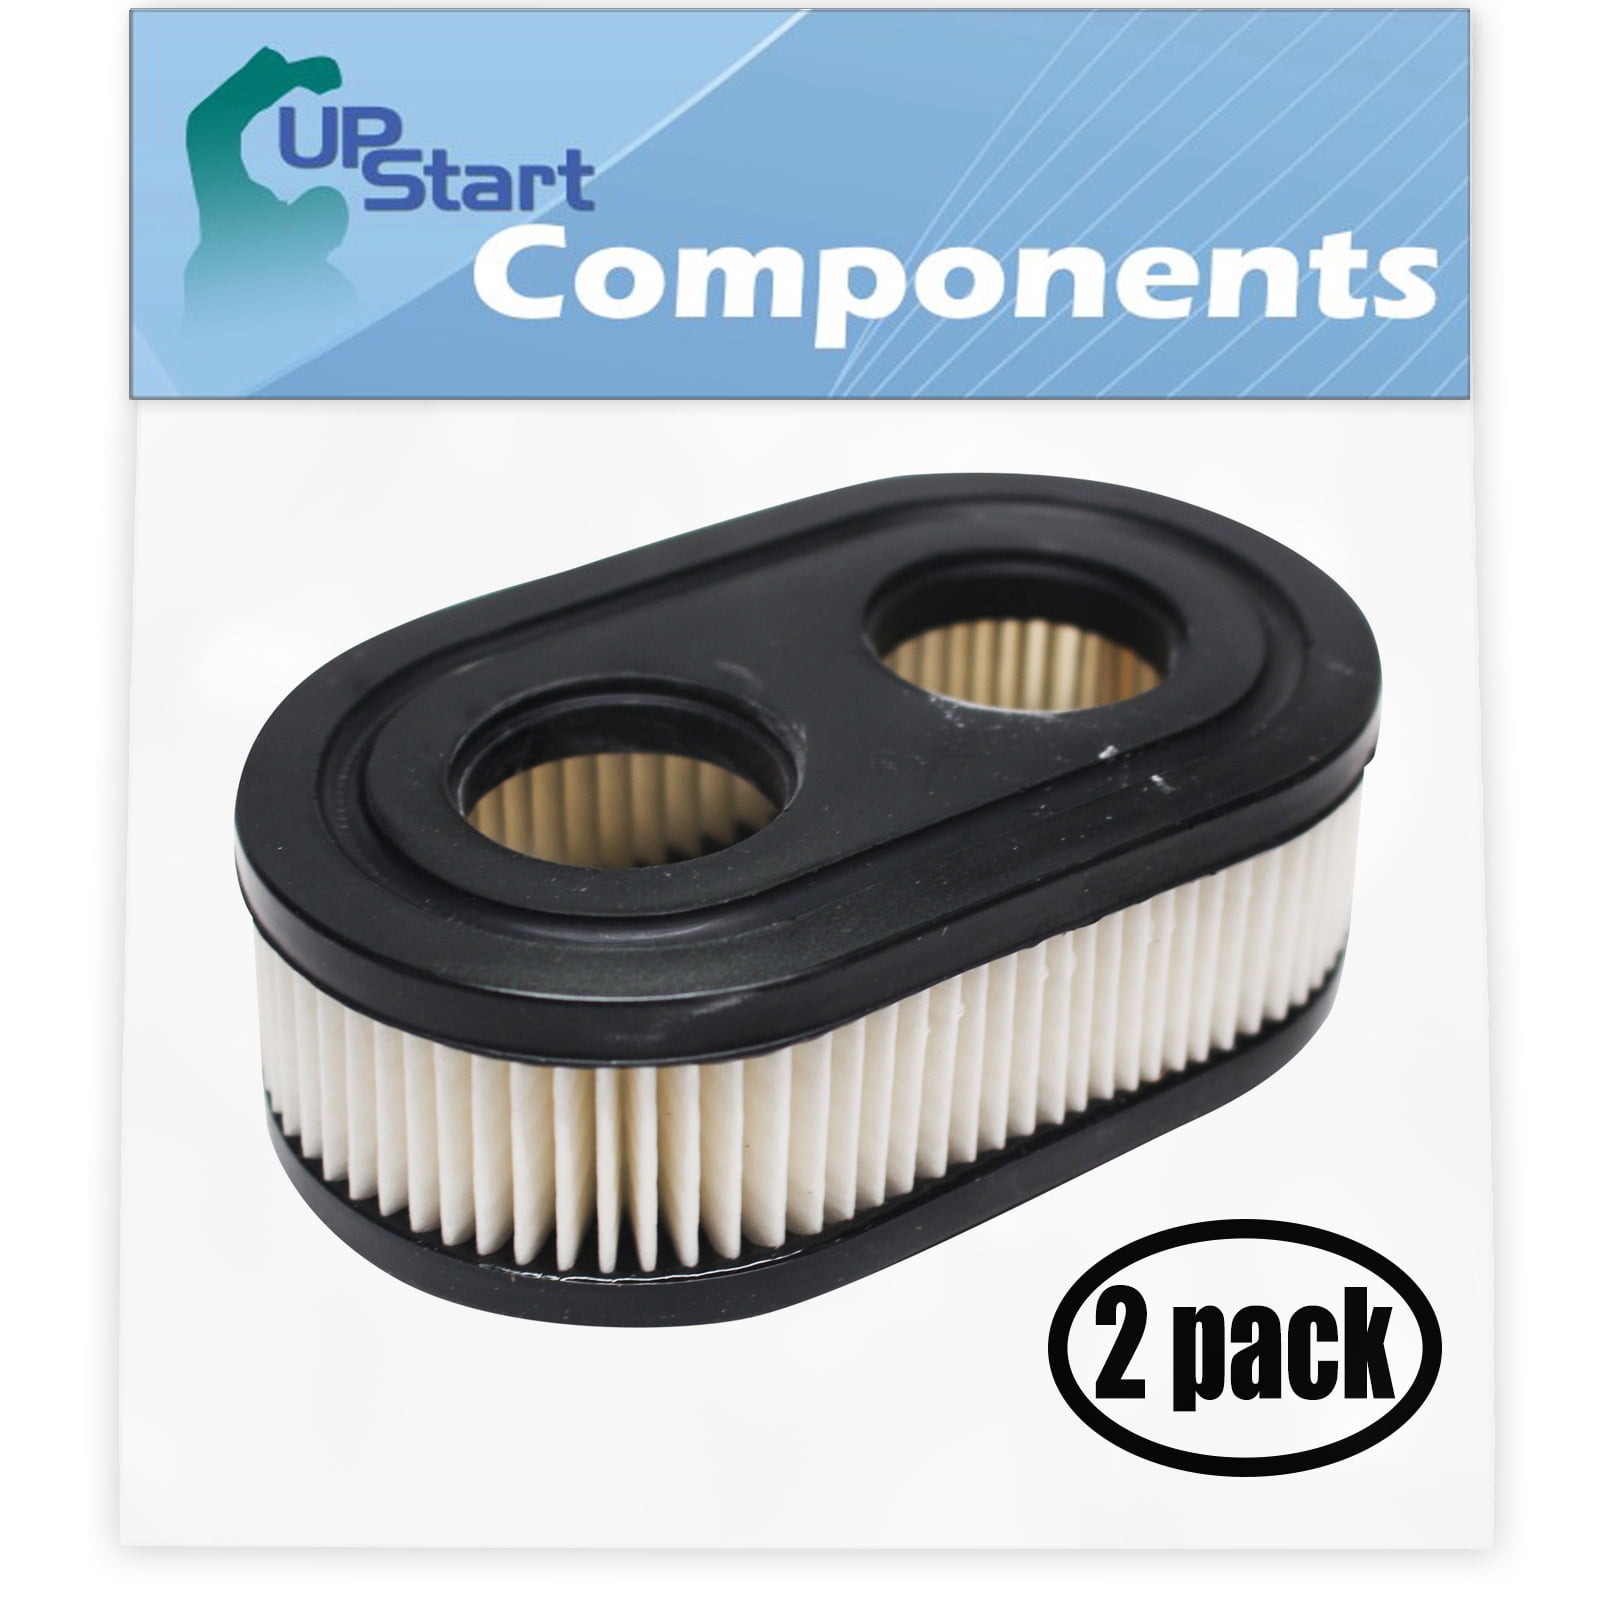 Stens New Air Filter Shop Pack 102-851-12 Compatible with/Replacement for Briggs & Stratton 593260 